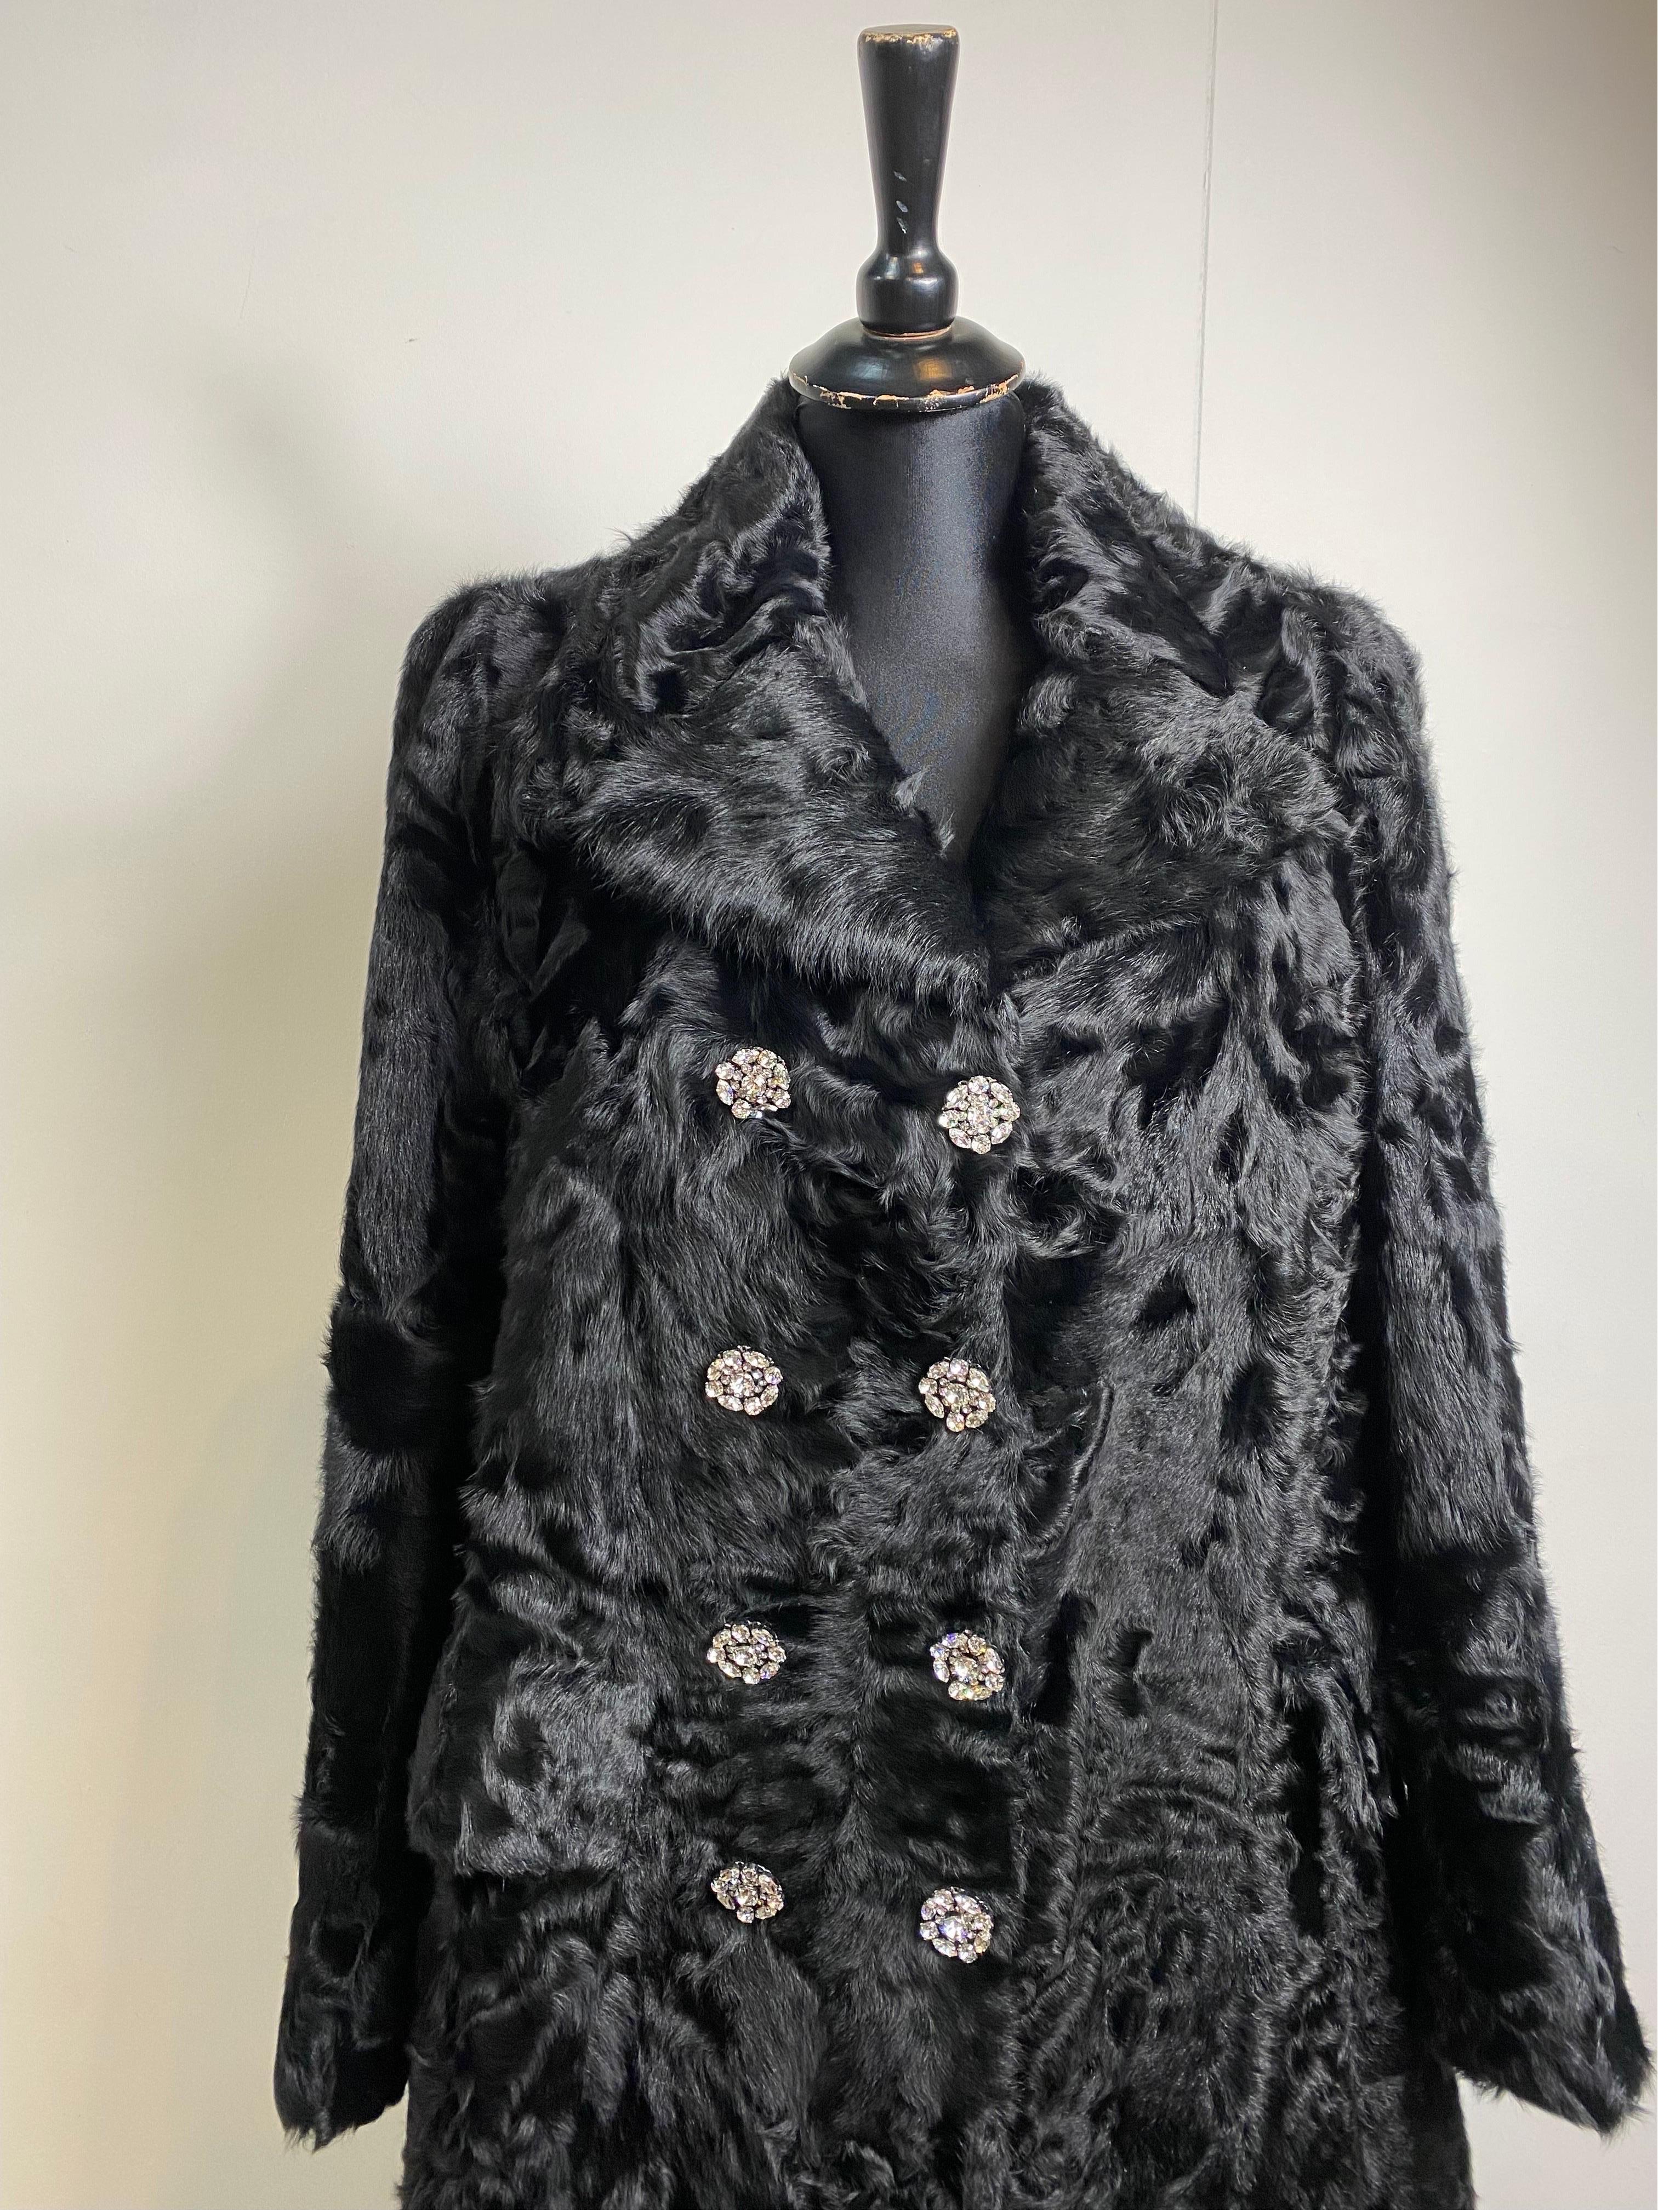 Dolce and Gabbana astrakhan fur coat.
Composition label missing. Lace lined with some pulled threads.
Rhinestone jewel buttons
Italian size 38 but fits oversized.
Shoulders 40 cm
Bust 40 cm
Length 103
Sleeve 60
Good general condition, with minimal